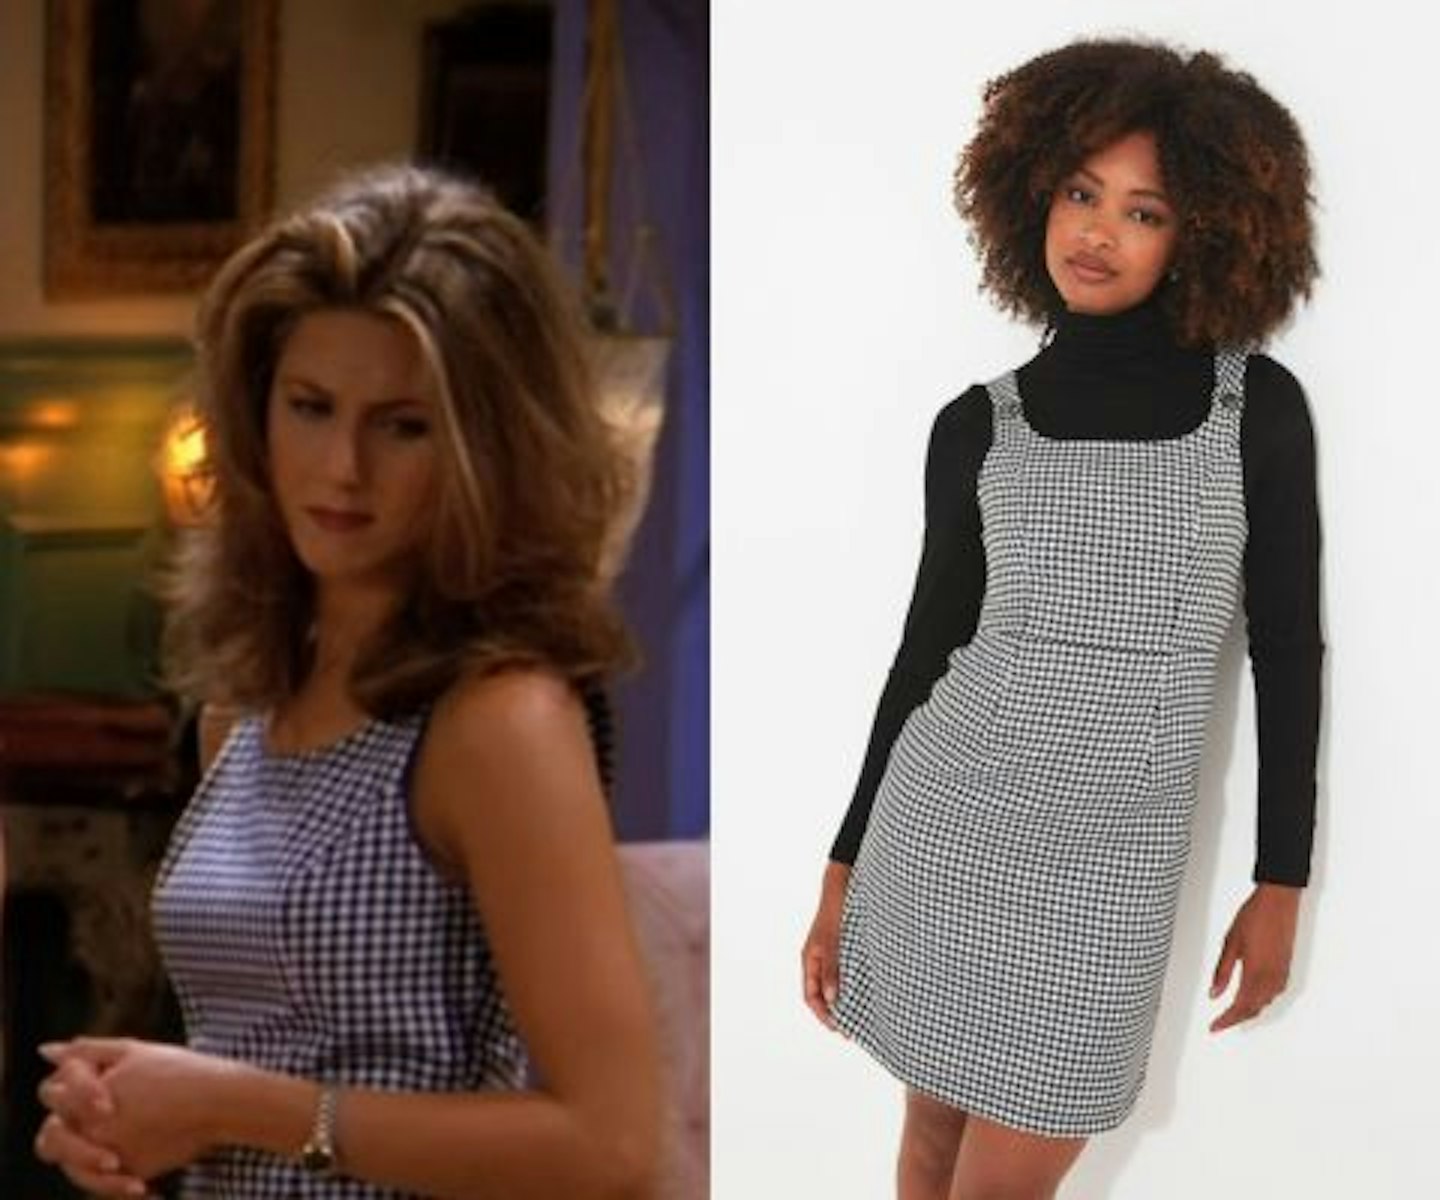 PrettyLittleThing have recreated the iconic Rachel Green dress for